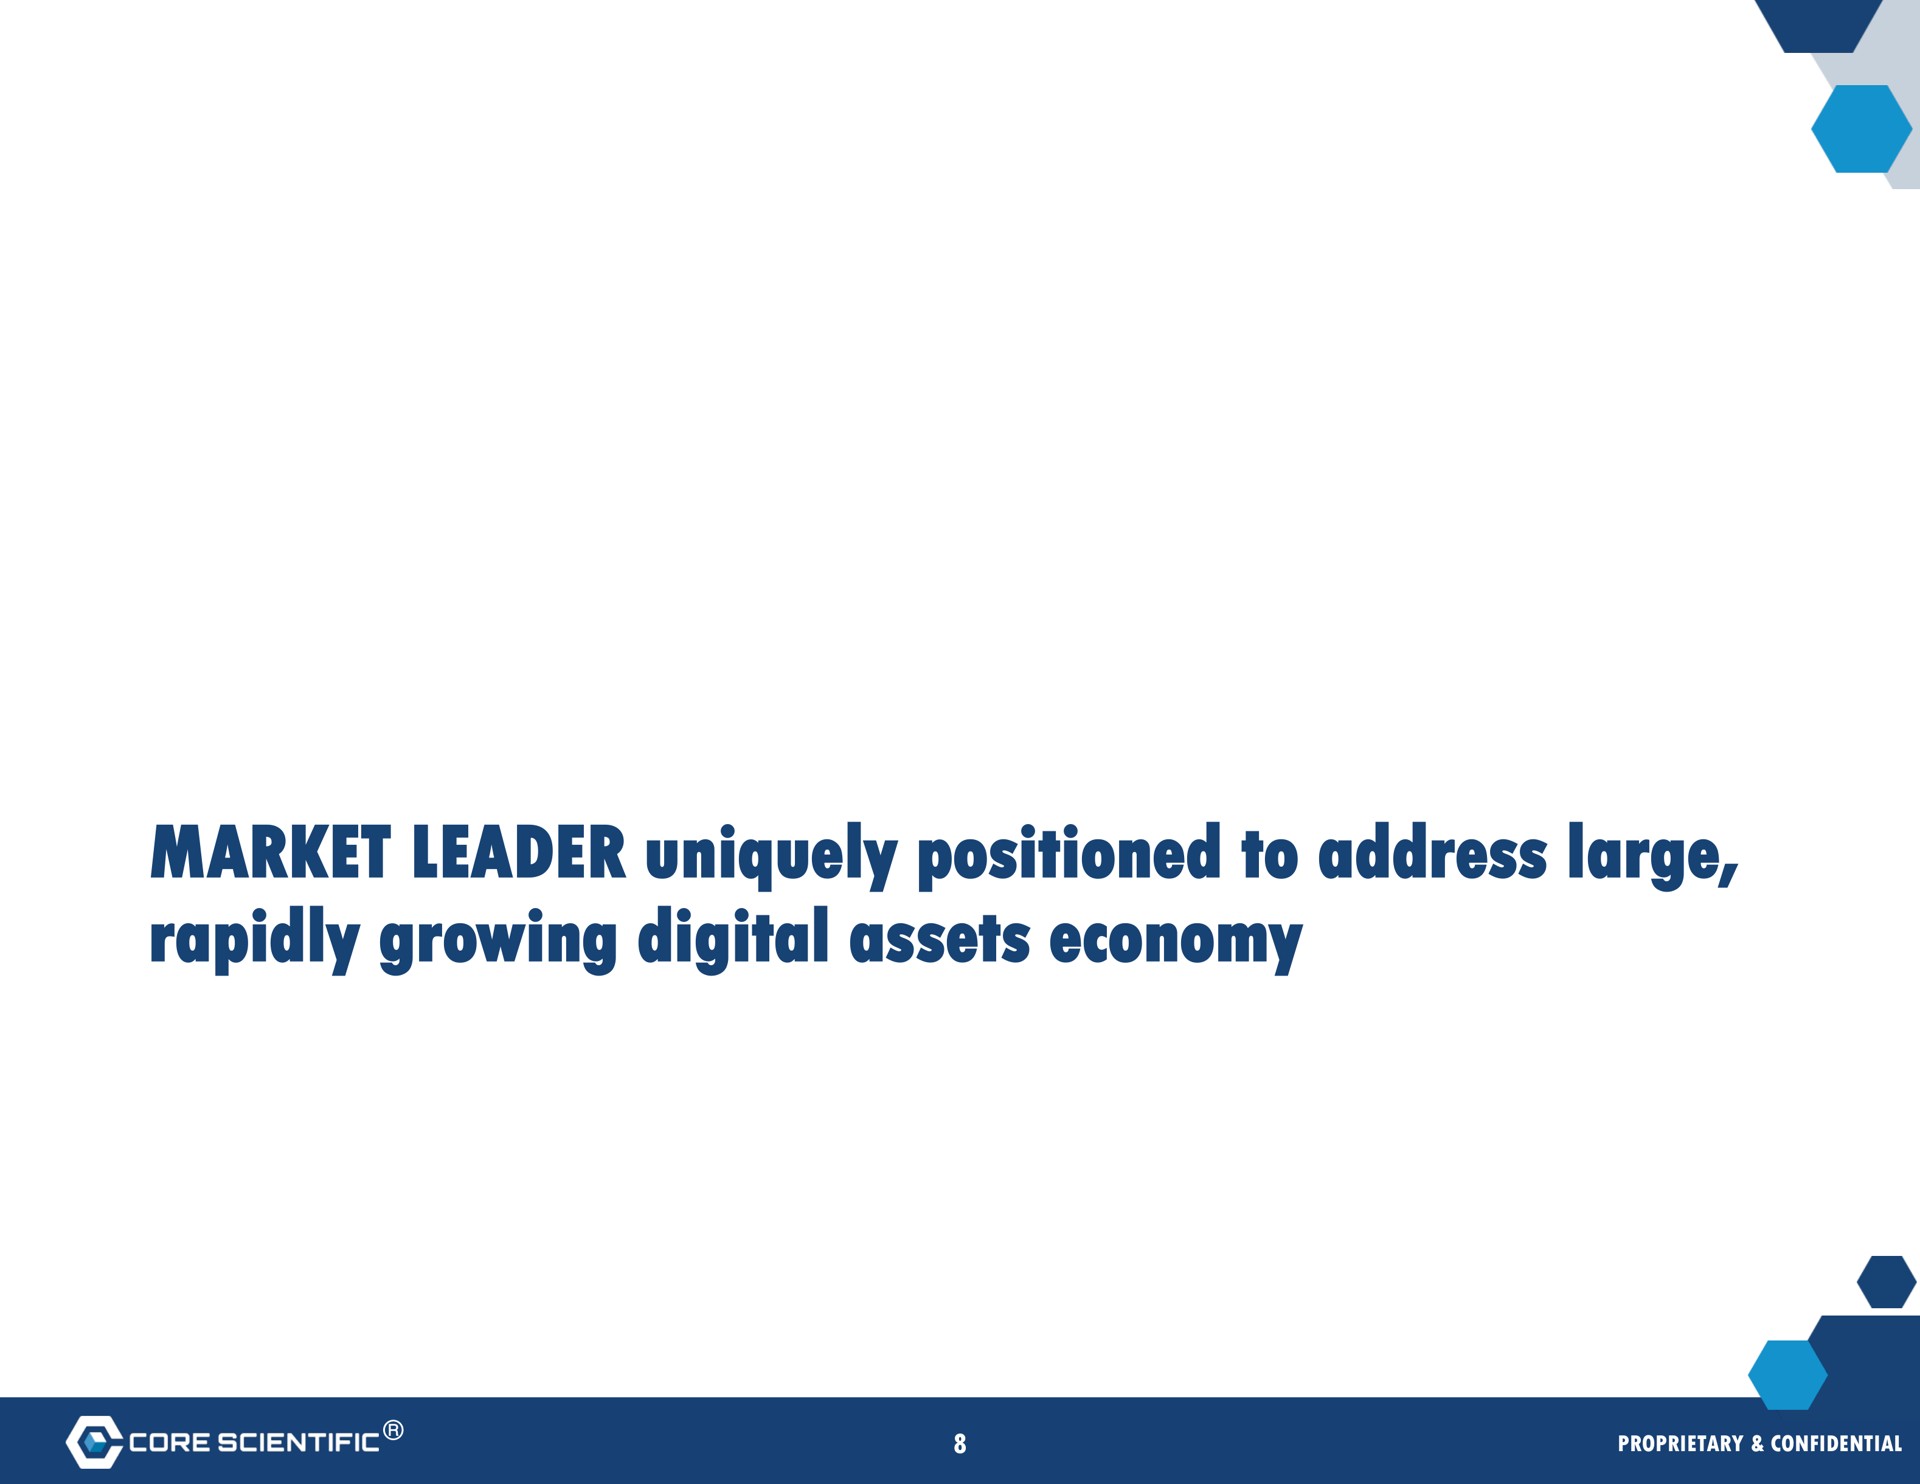 market leader uniquely positioned to address large rapidly growing digital assets economy | Core Scientific